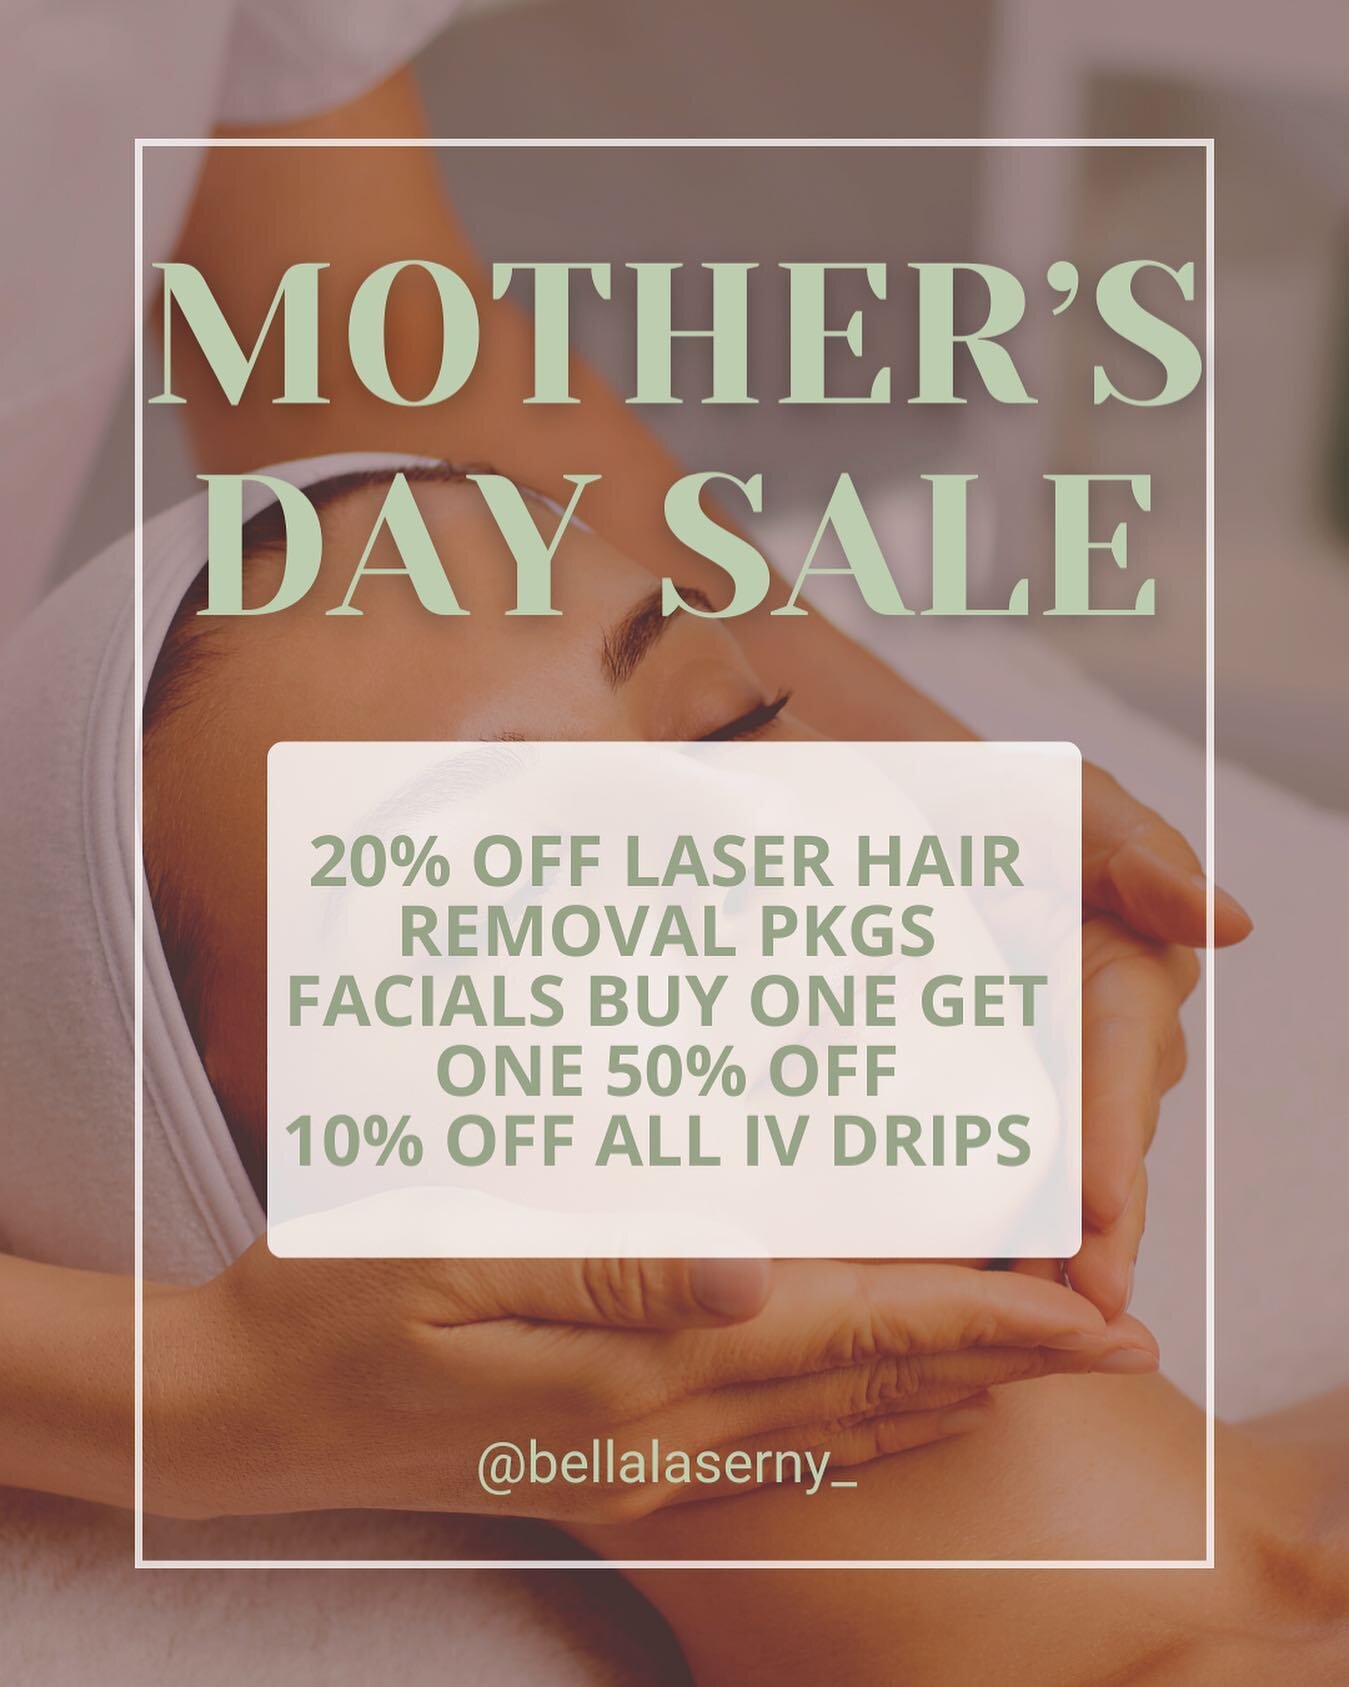 We are launching our promotions as a way to congratulate all the moms on this upcoming Mothers Day! 💗

What better gift to give then smooth healthy skin, just in time for summer. Gift cards are available for purchase. 

Act fast 💨 sale ending Monda